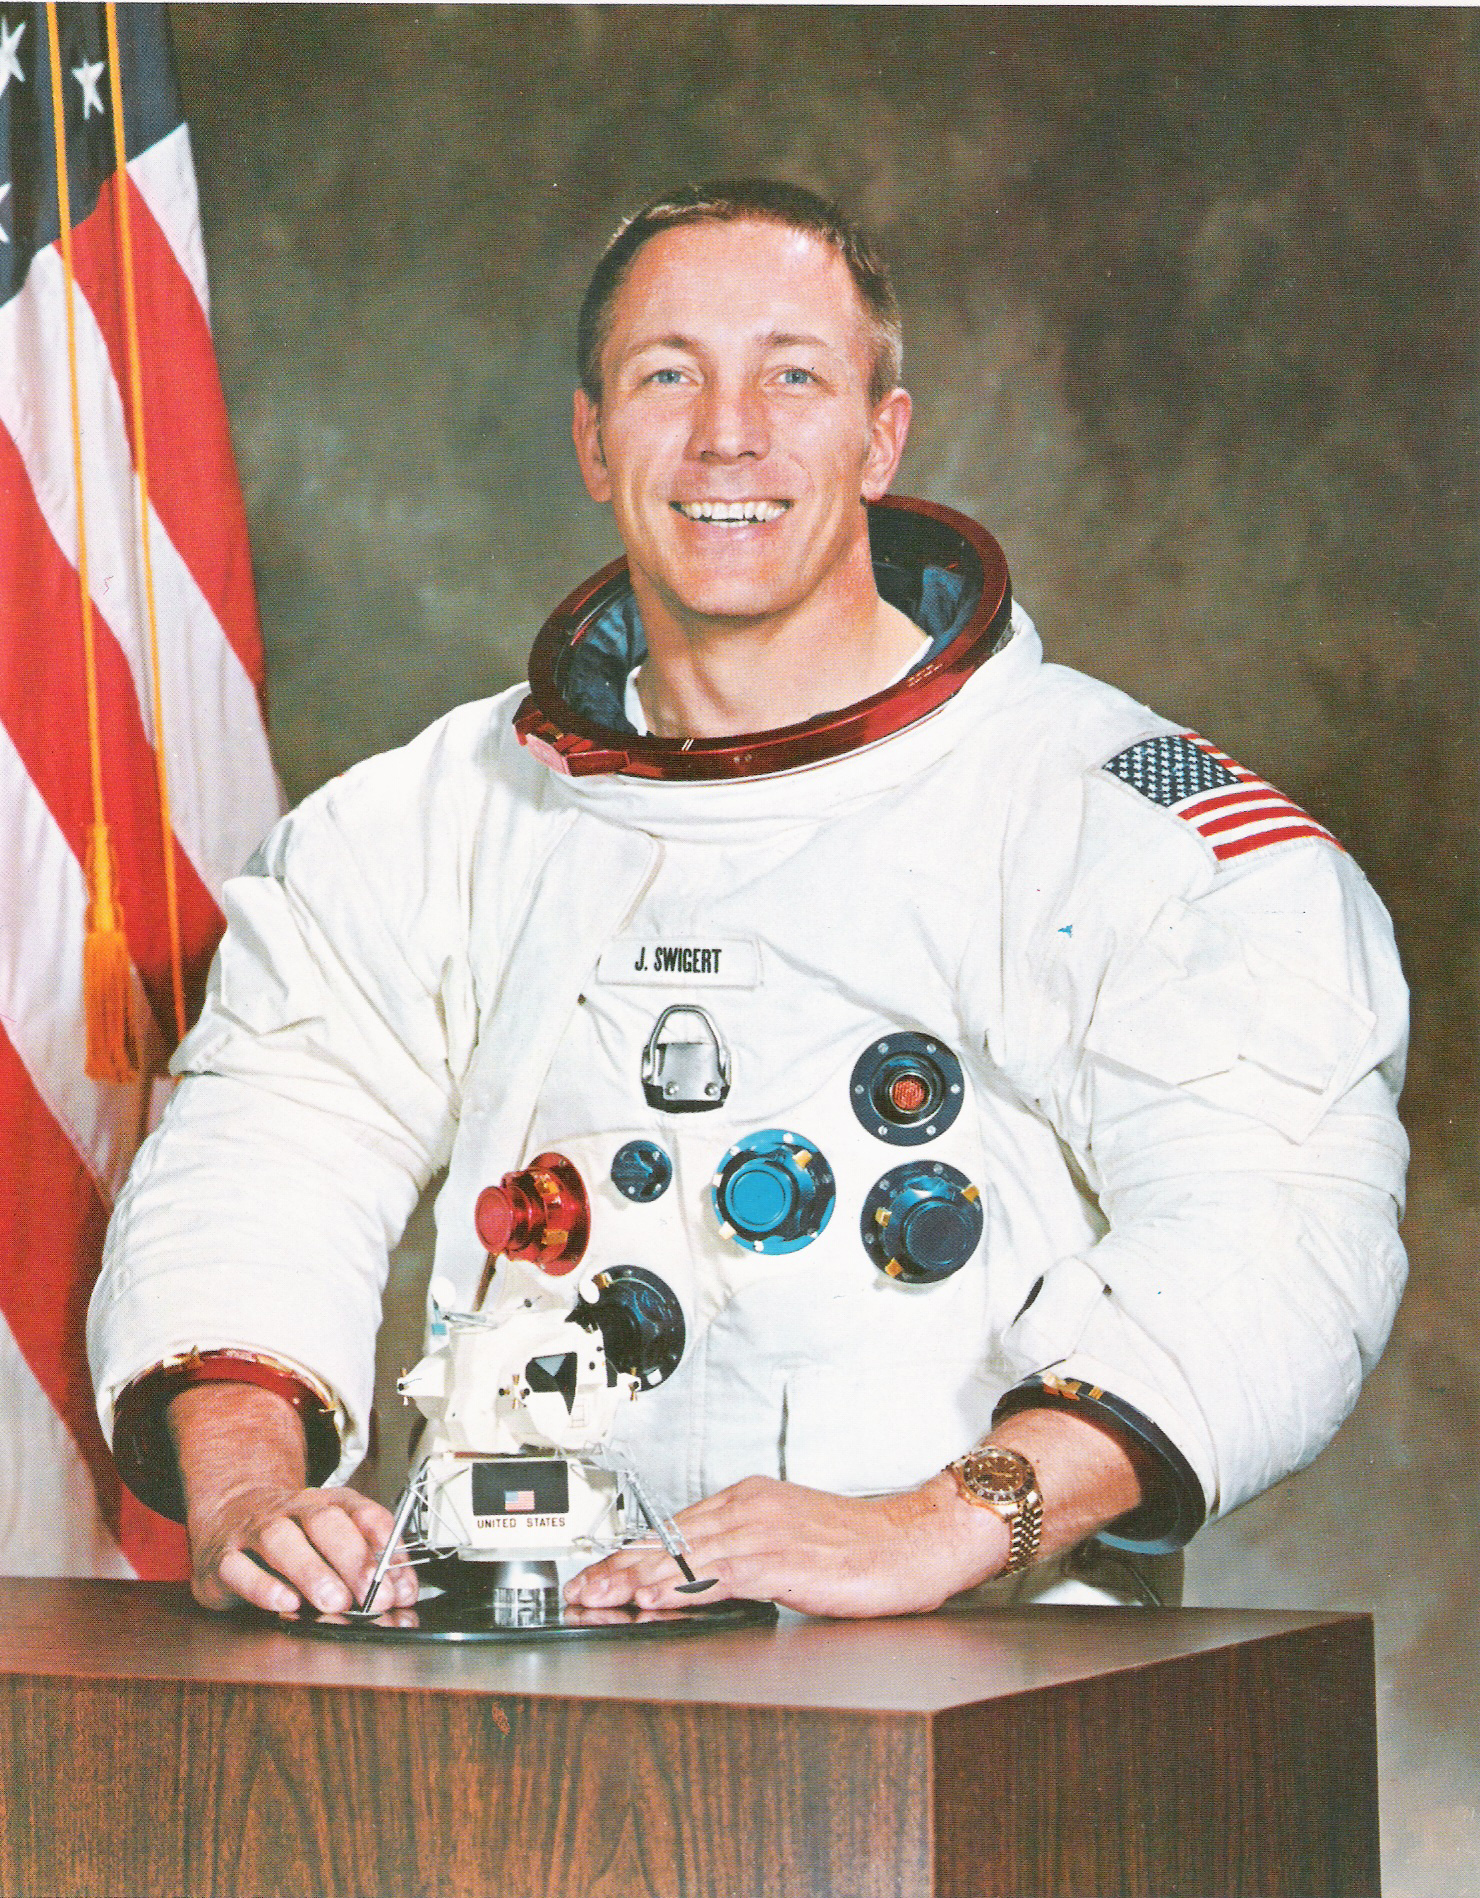 jack swigert standing in a spacesuit and smiling. he holds a model lunar rover in his hands, which is resting on a table